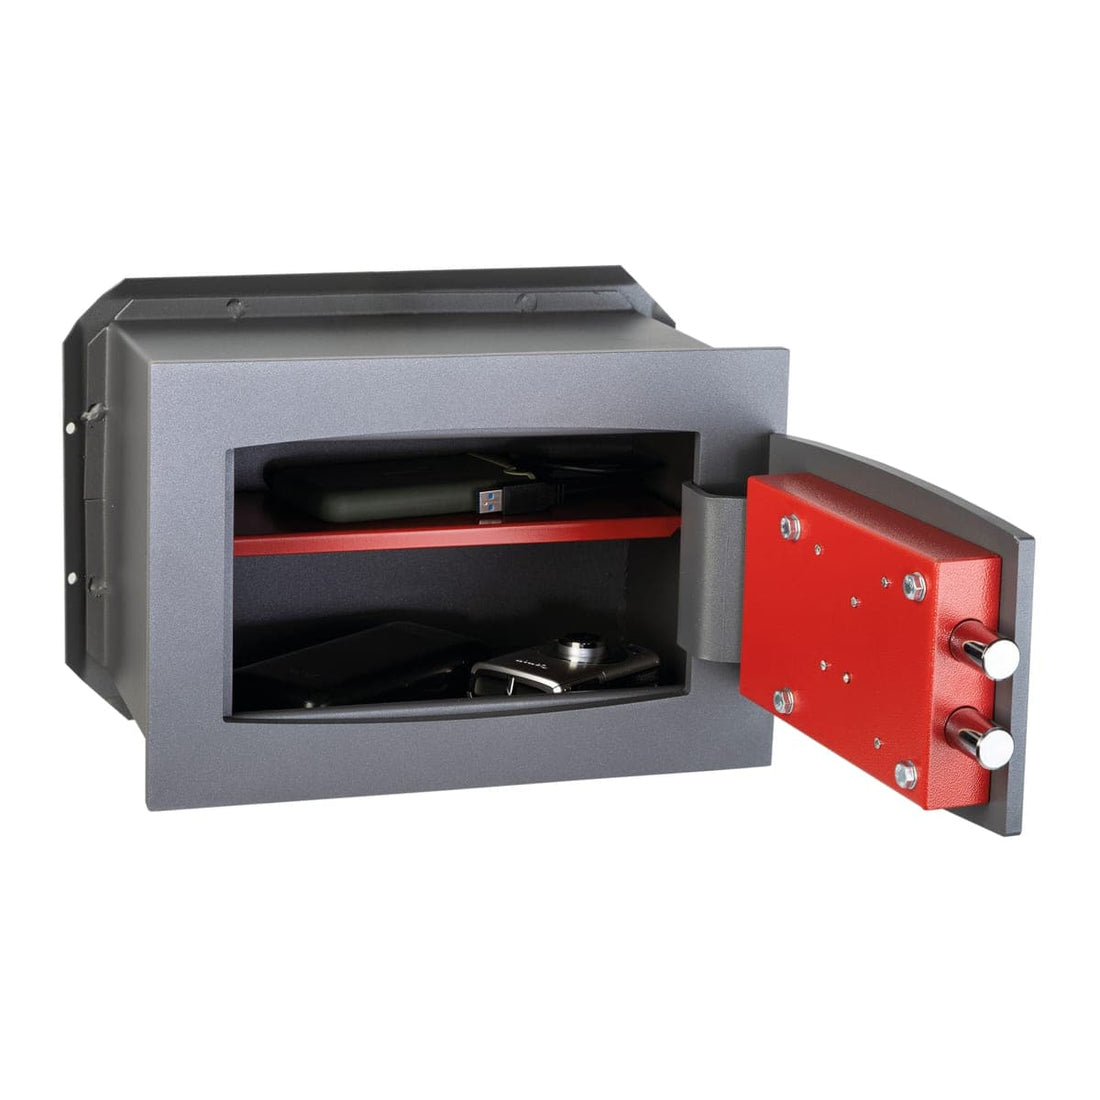 WALL SAFE WITH KEY RS-3 31X19.5X21 CM - best price from Maltashopper.com BR410004049